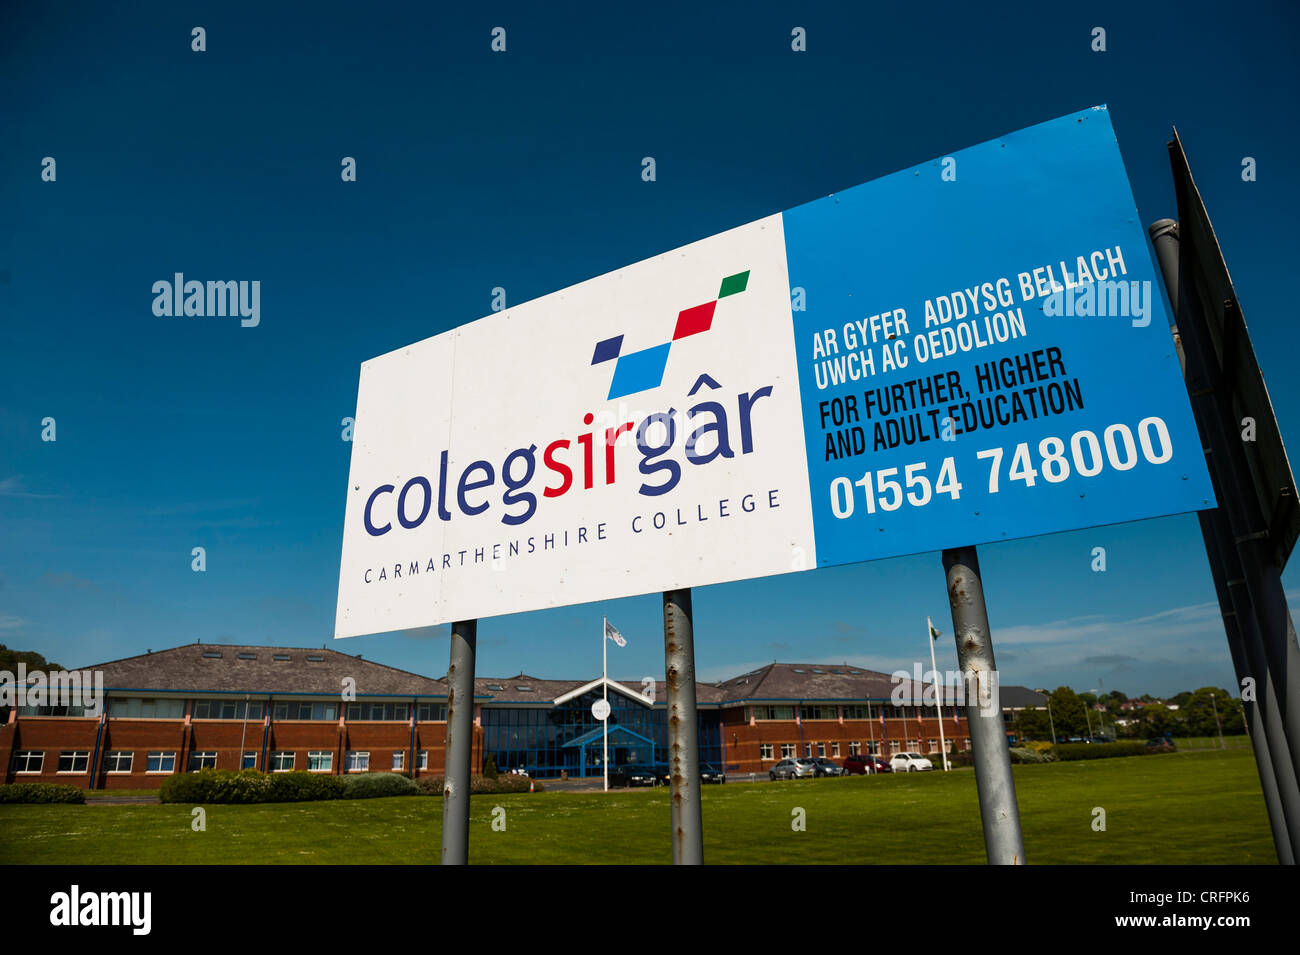 exterior, and sign, Coleg Sir Gar further, adult and higher education college, Llanelli Carmarthenshire Wales UK Stock Photo